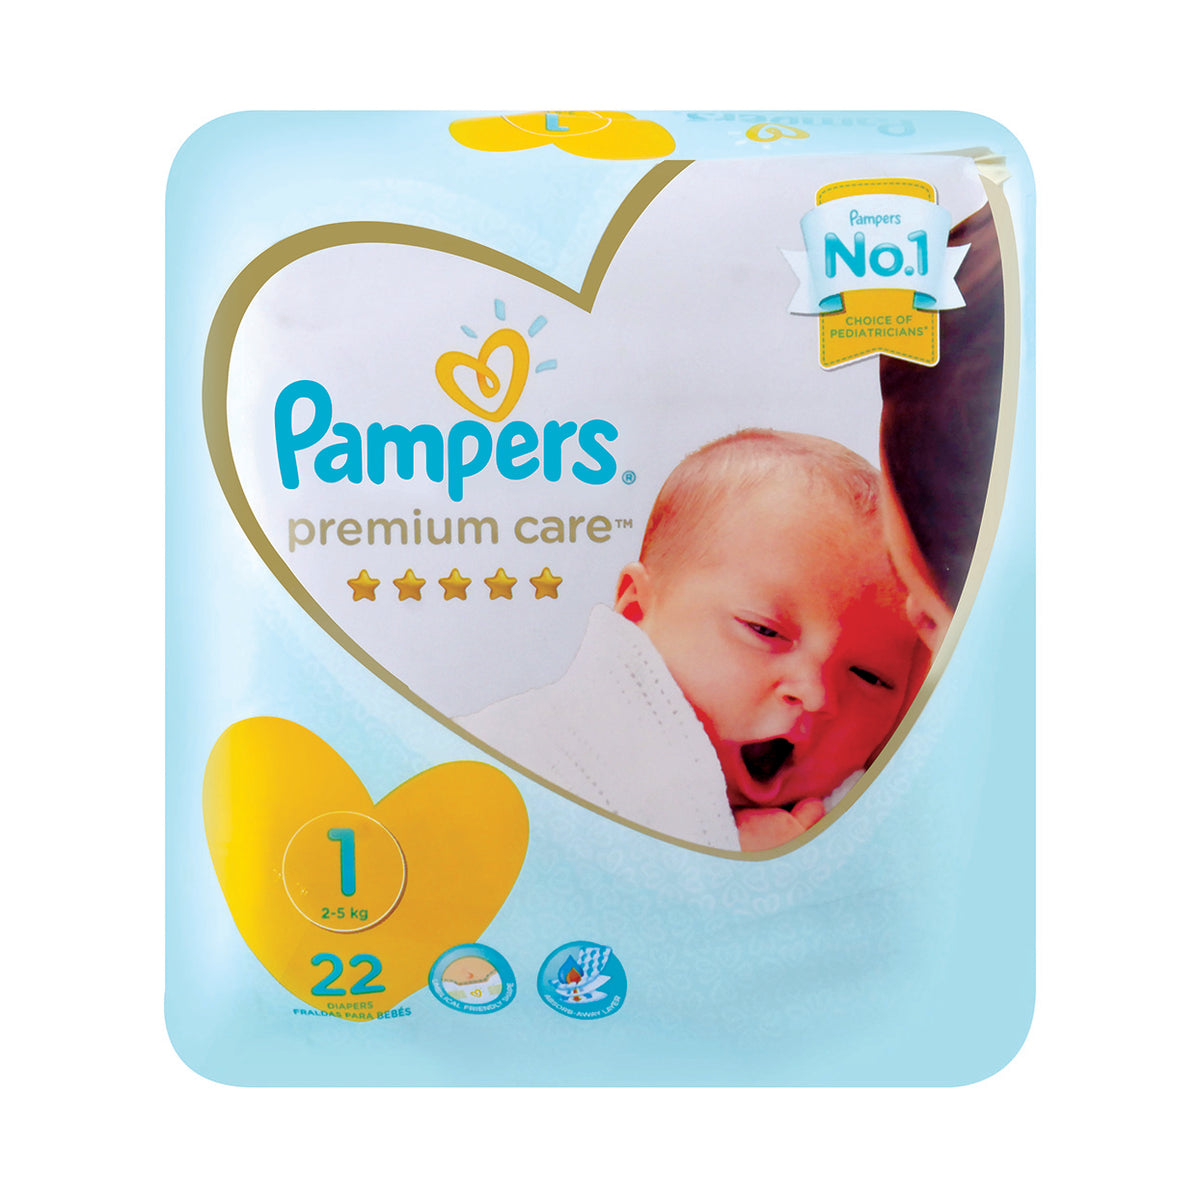 Pampers Premium Care Pants Diapers, Size 3, 6-11kg, 56 Diapers